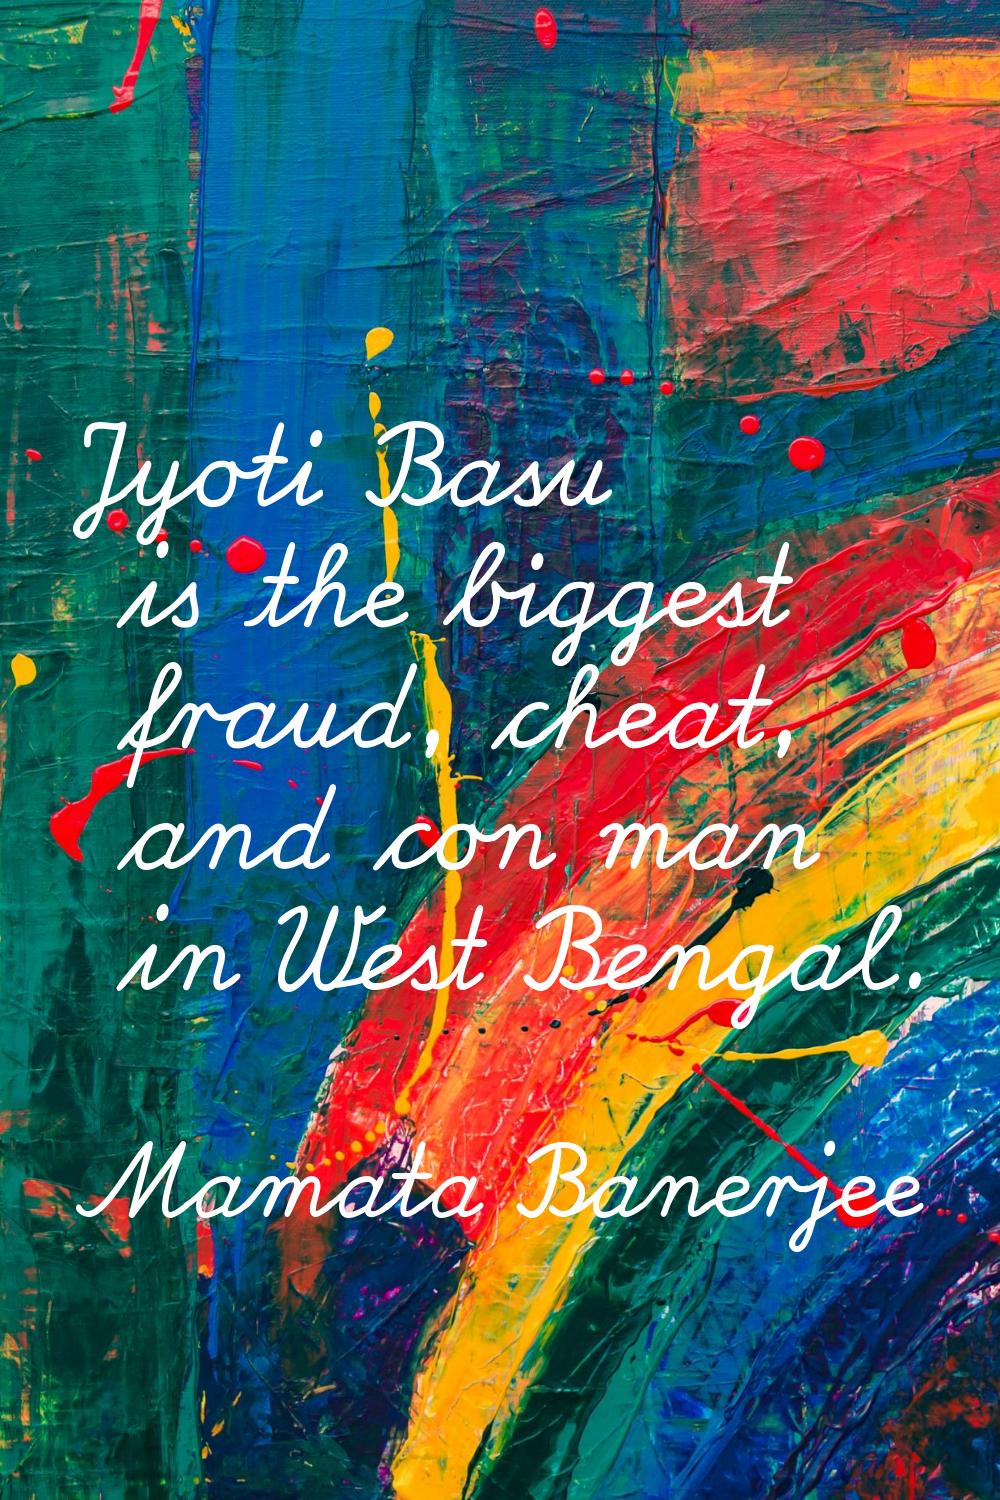 Jyoti Basu is the biggest fraud, cheat, and con man in West Bengal.